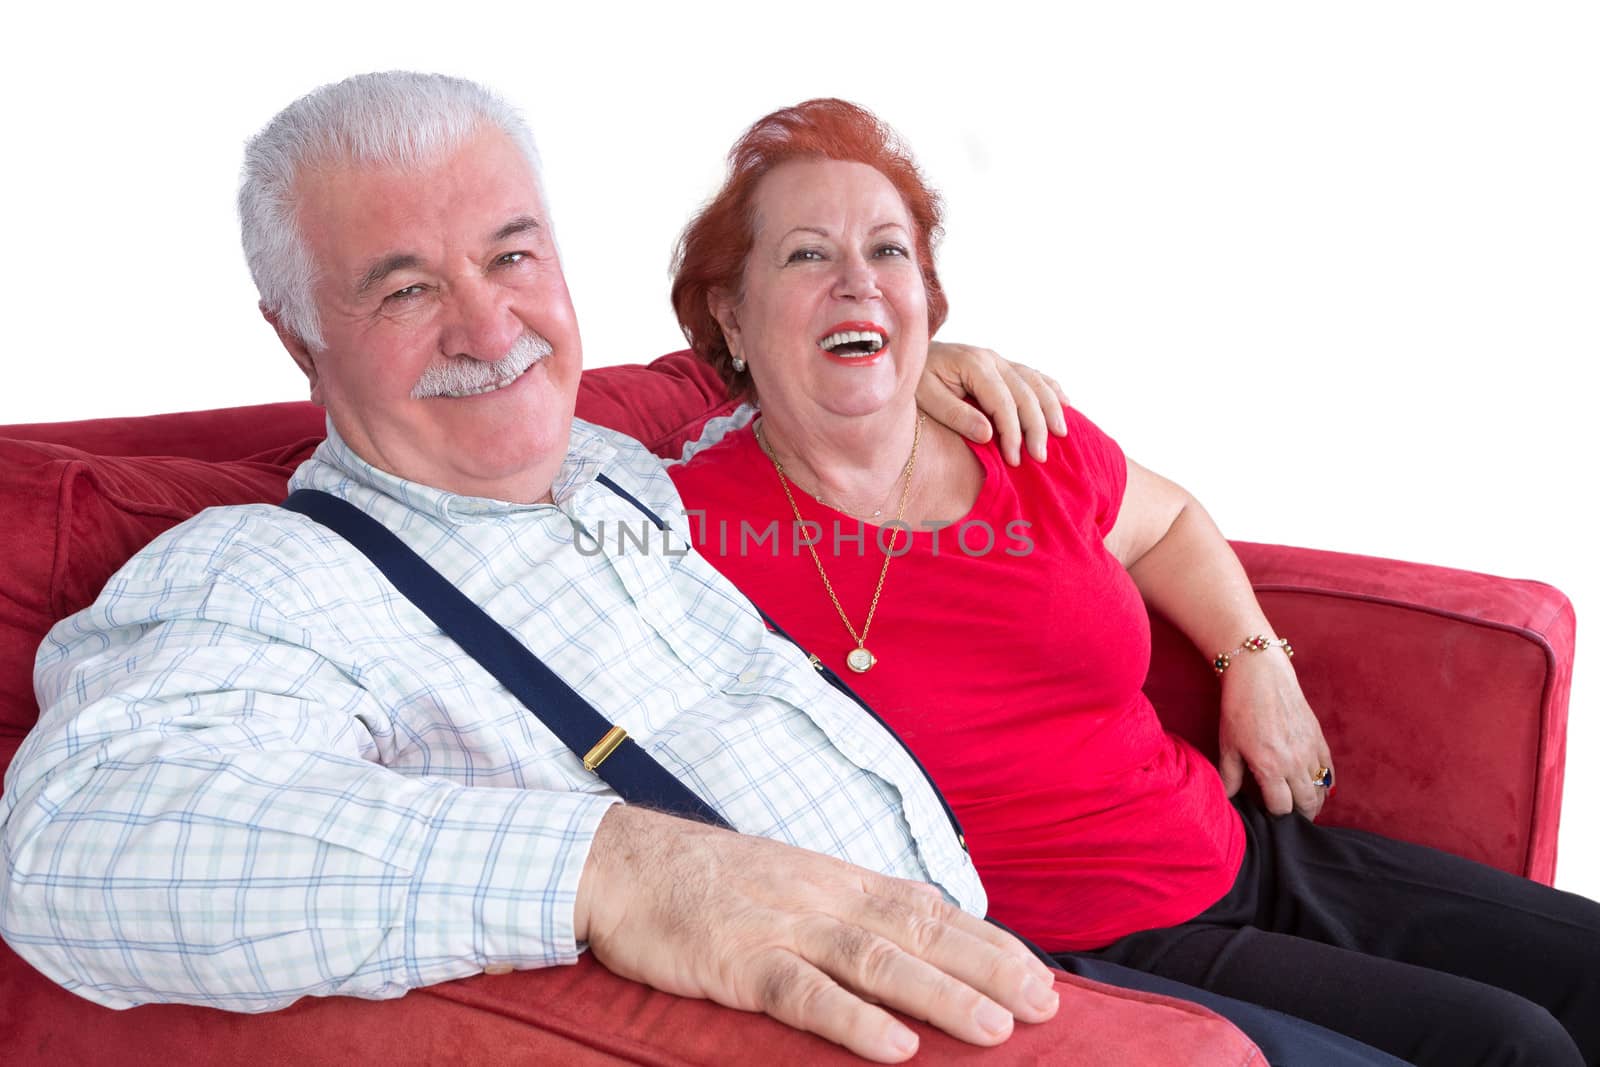 Joyful relaxed elderly couple sitting arm in arm on a red sofa laughing at the camera over white